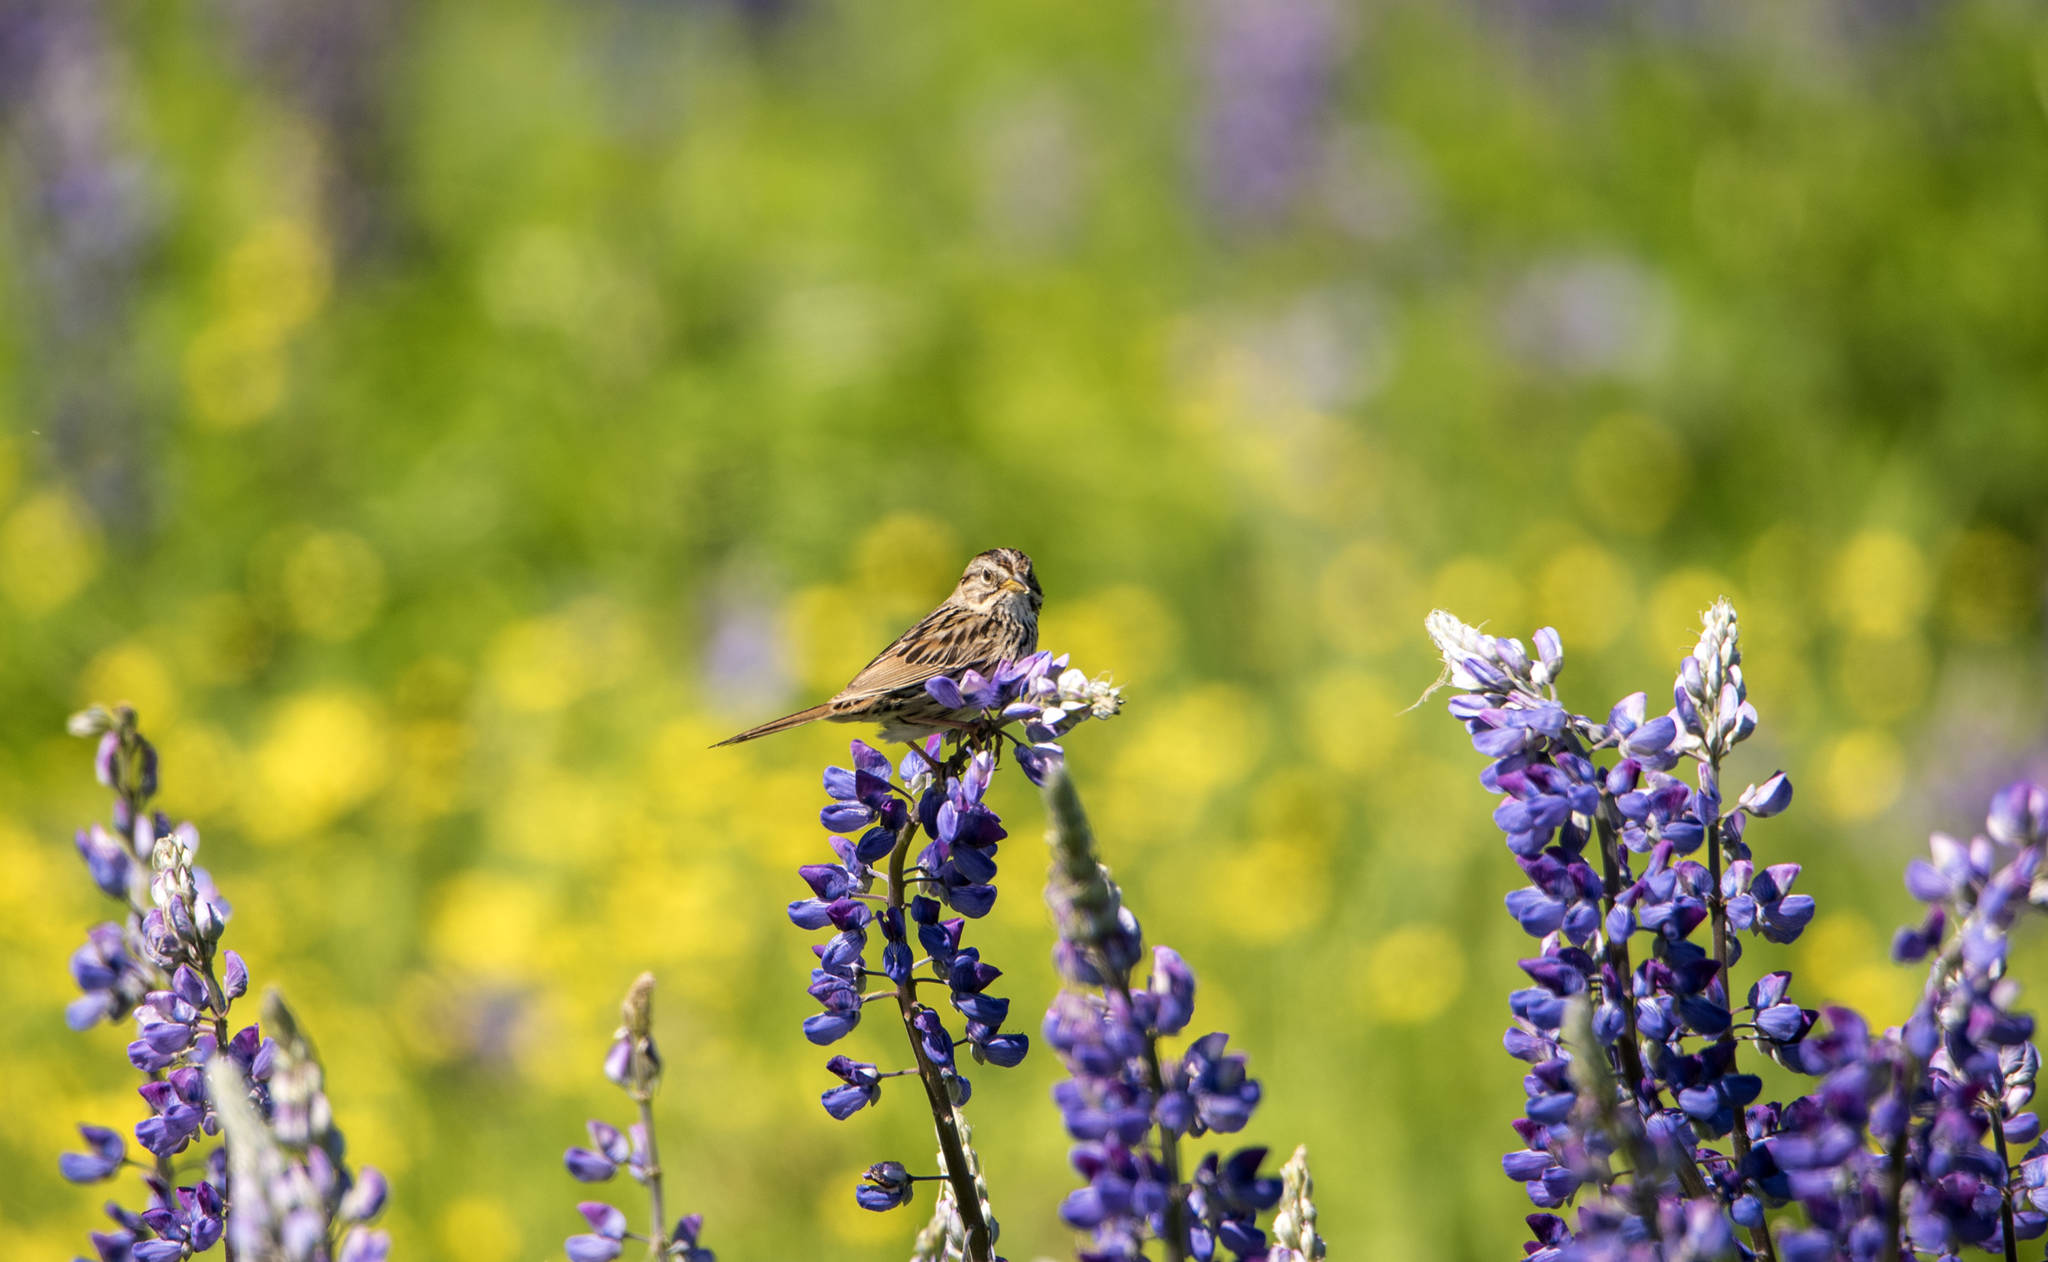 Pine Siskin perches on Lupine at Cowee Meadows. (Courtesy Photo / Kenneth Gill, gillfoto)